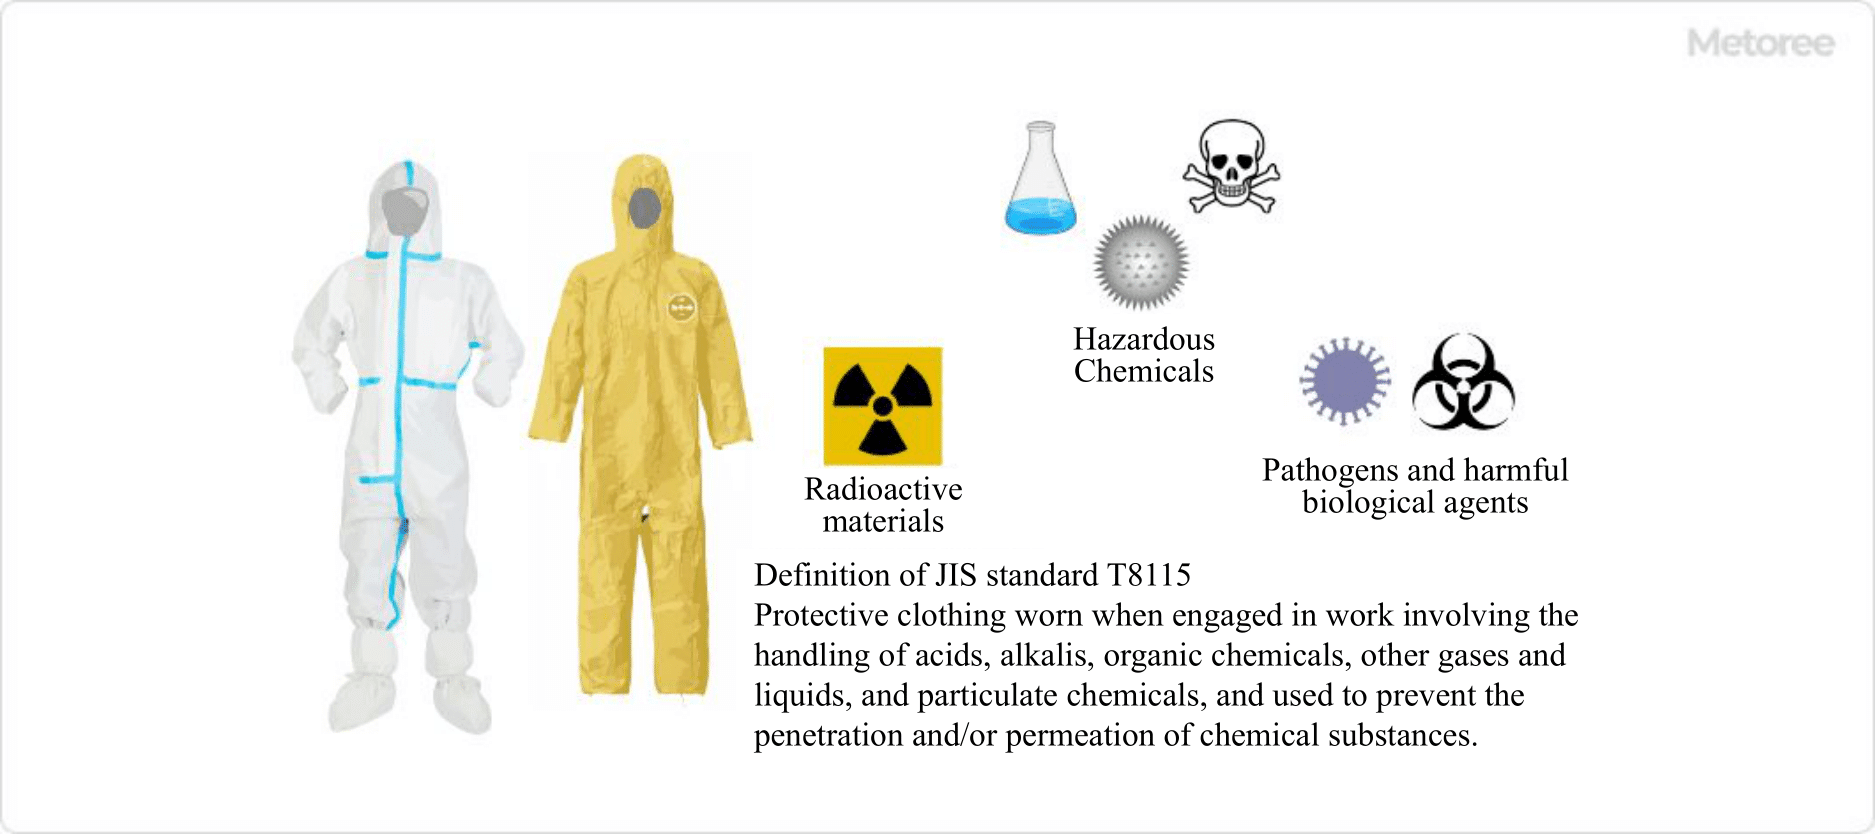 Figure 1. Overview of protective clothing